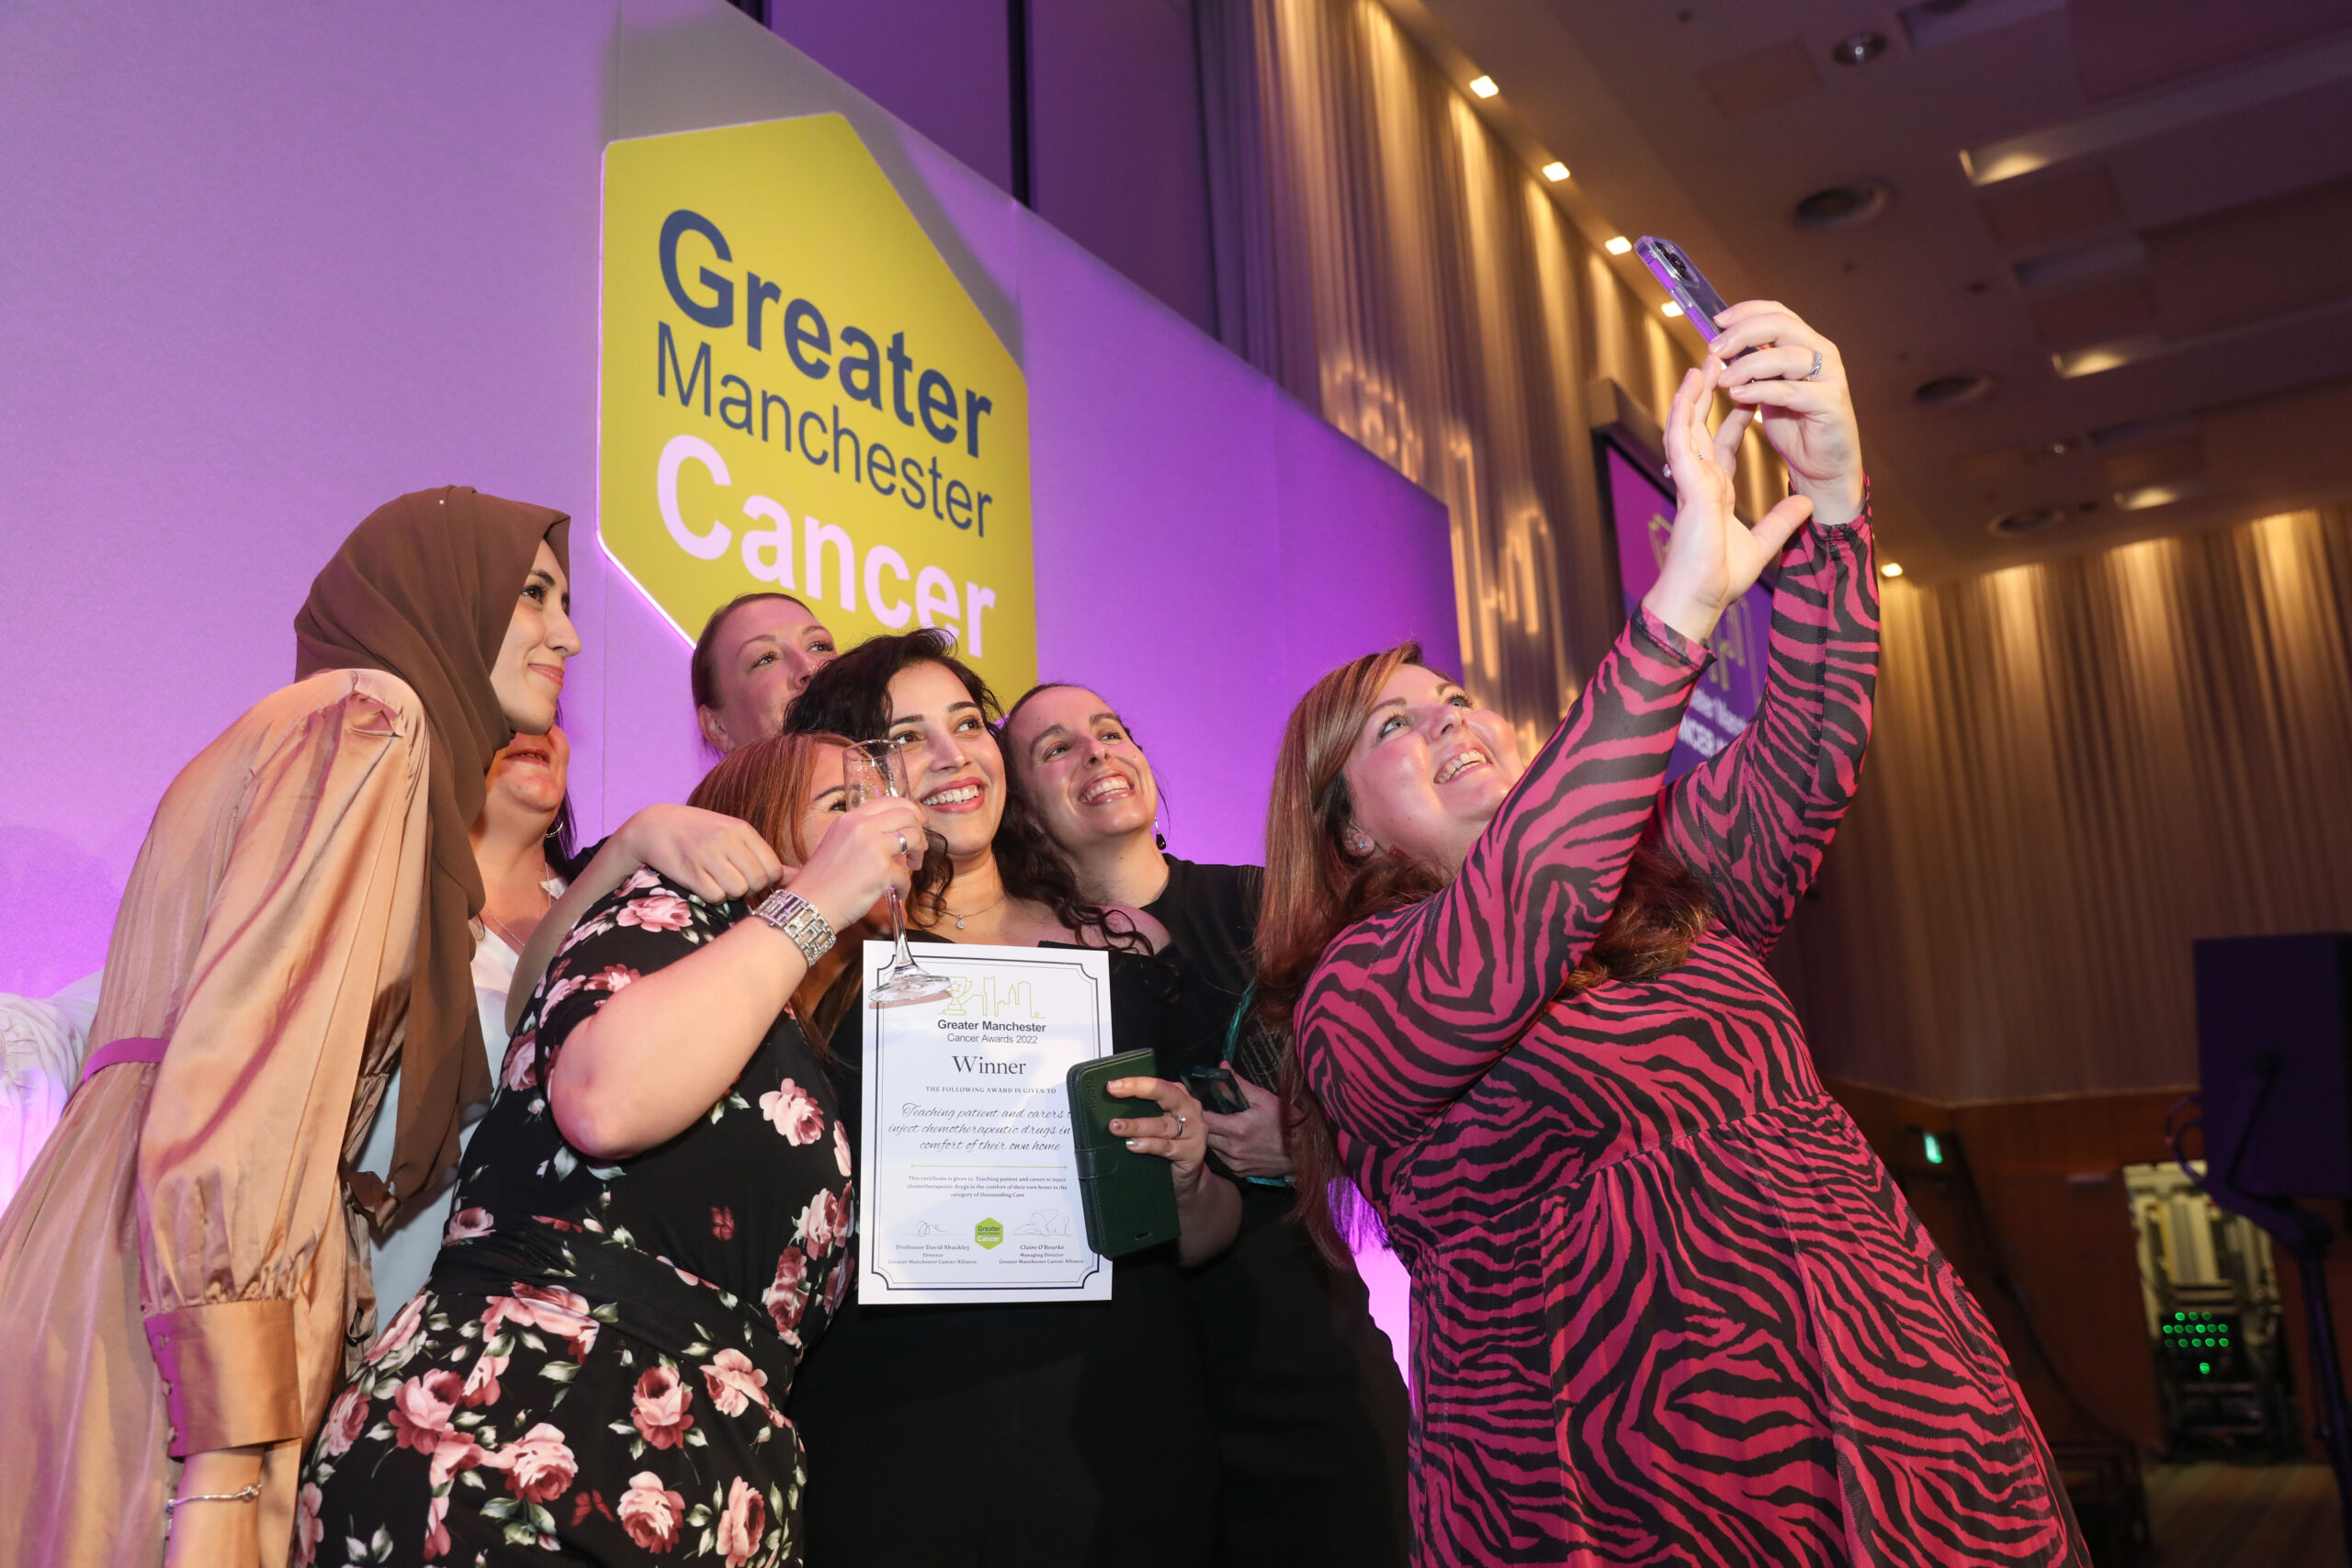 A woman in a red striped dress takes a selfie of colleagues on stage holding a 'winner' certificate